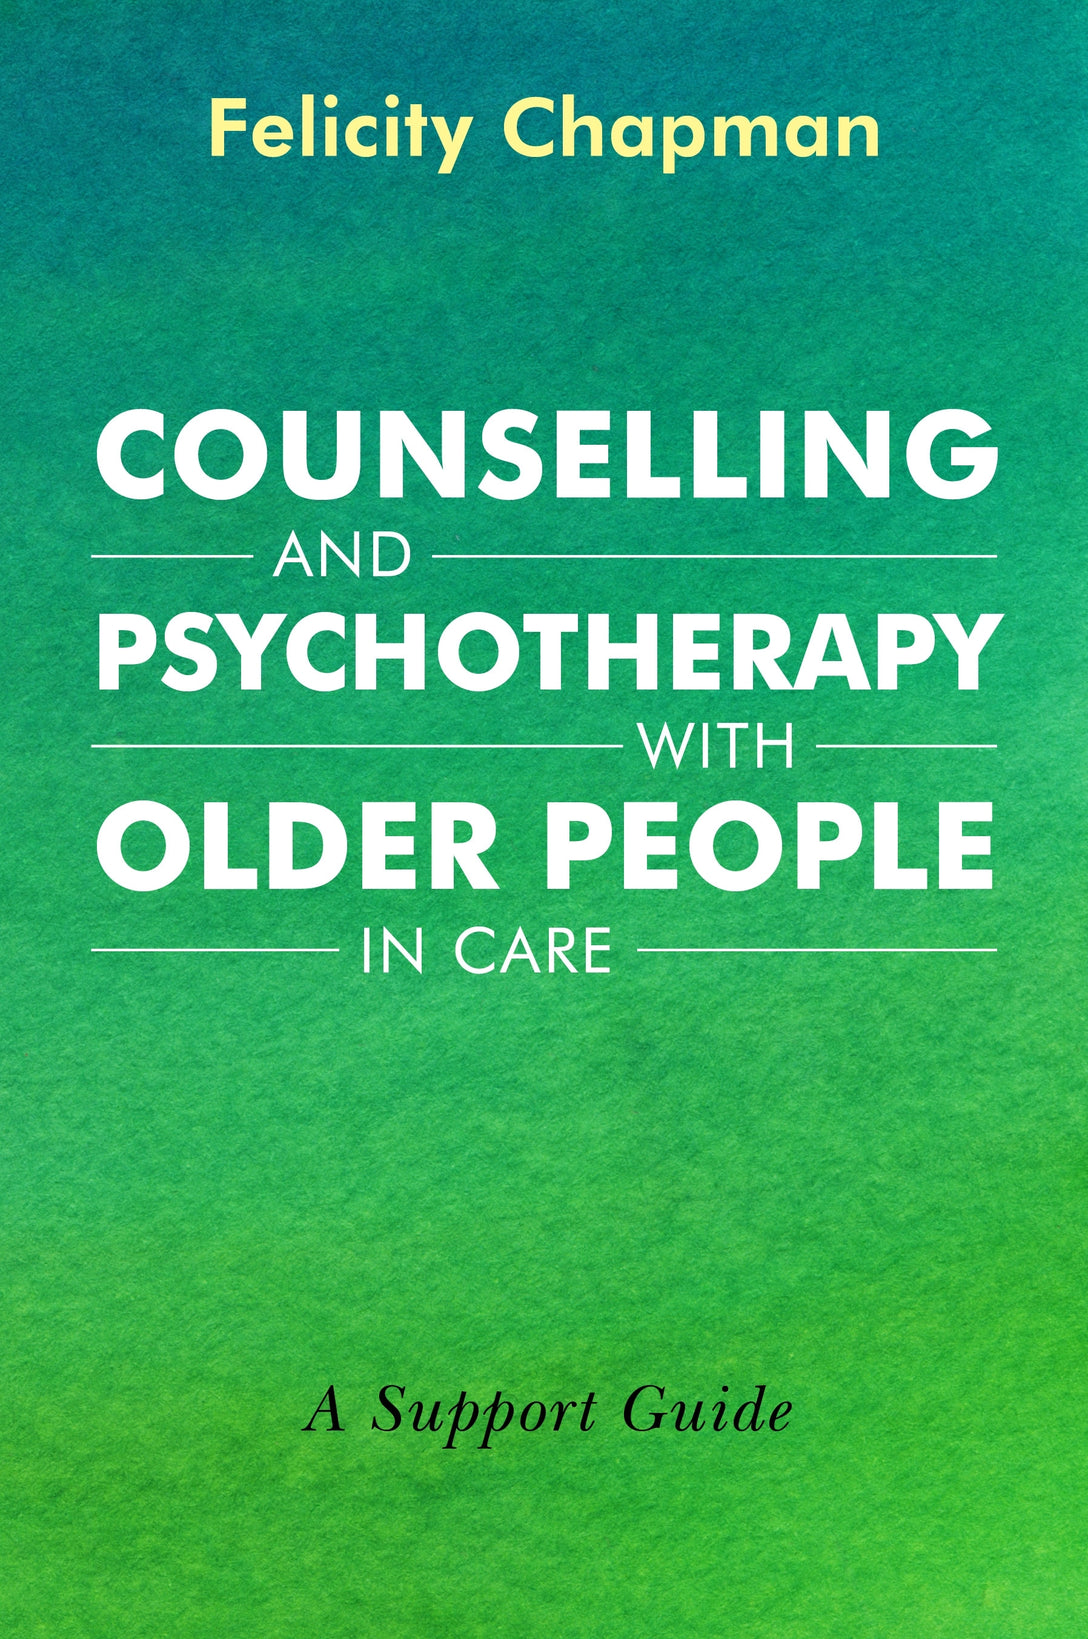 Counselling and Psychotherapy with Older People in Care by Felicity Chapman